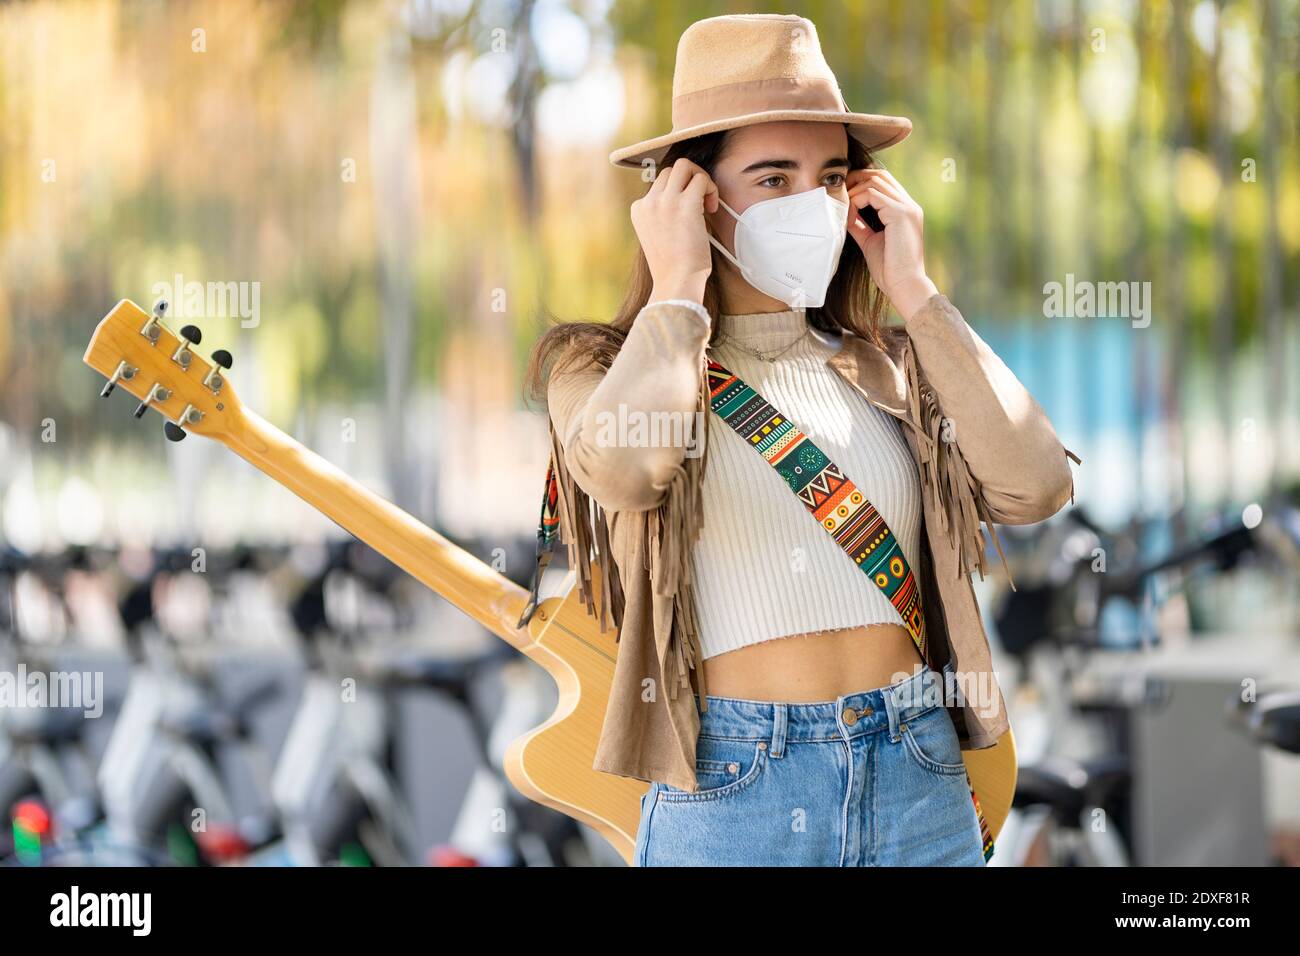 Young woman against wearing protective face mask during pandemic Stock Photo